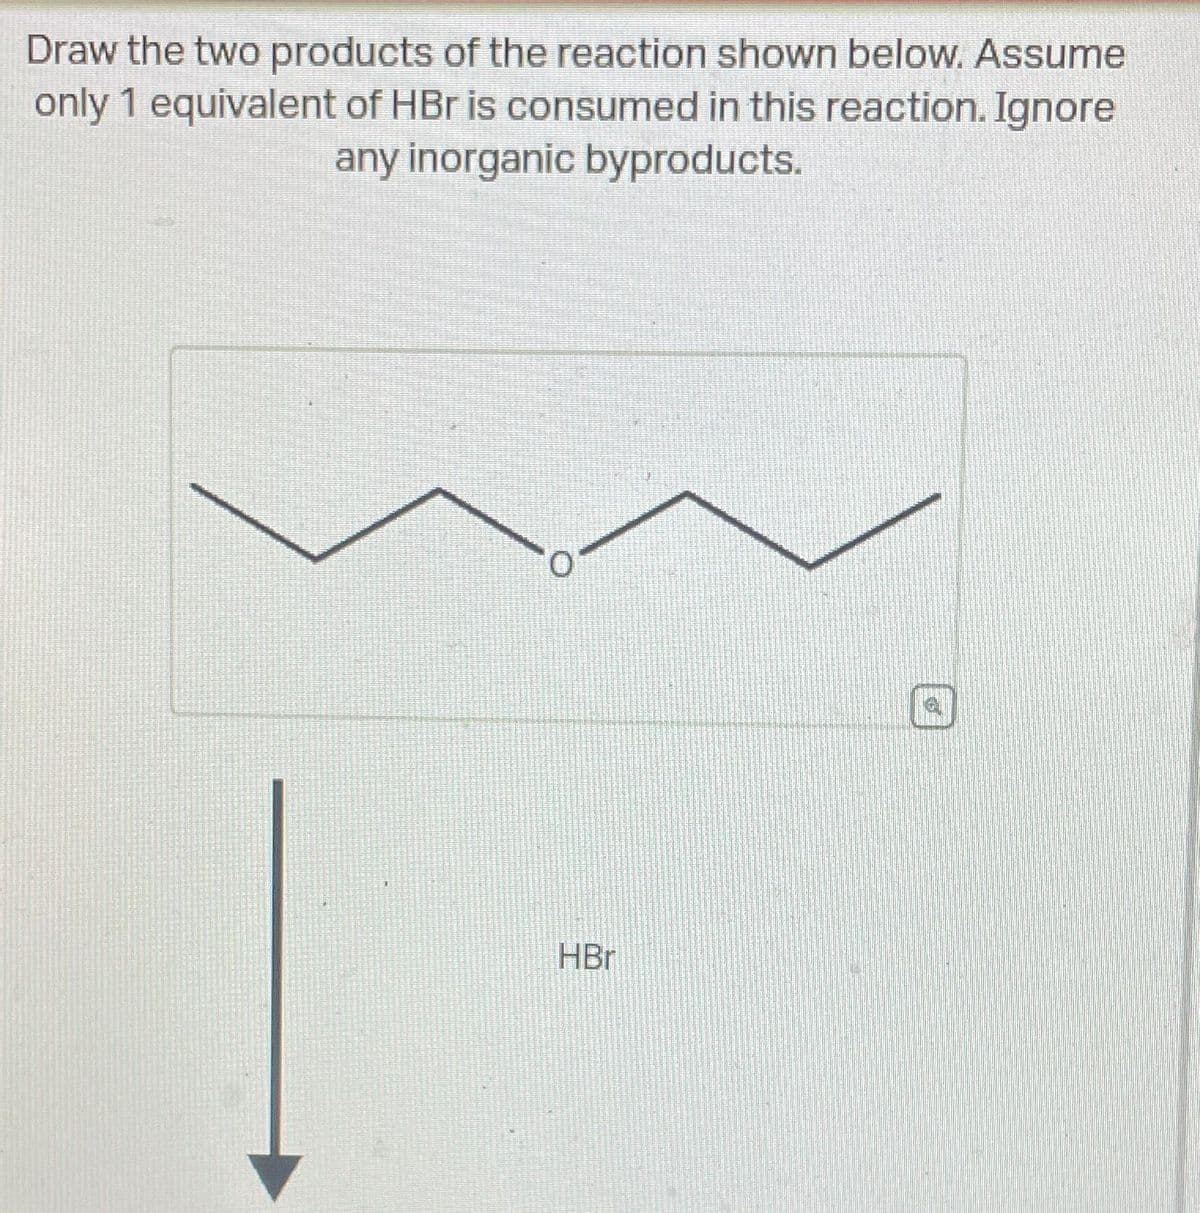 Draw the two products of the reaction shown below. Assume
only 1 equivalent of HBr is consumed in this reaction. Ignore
any inorganic byproducts.
HBr